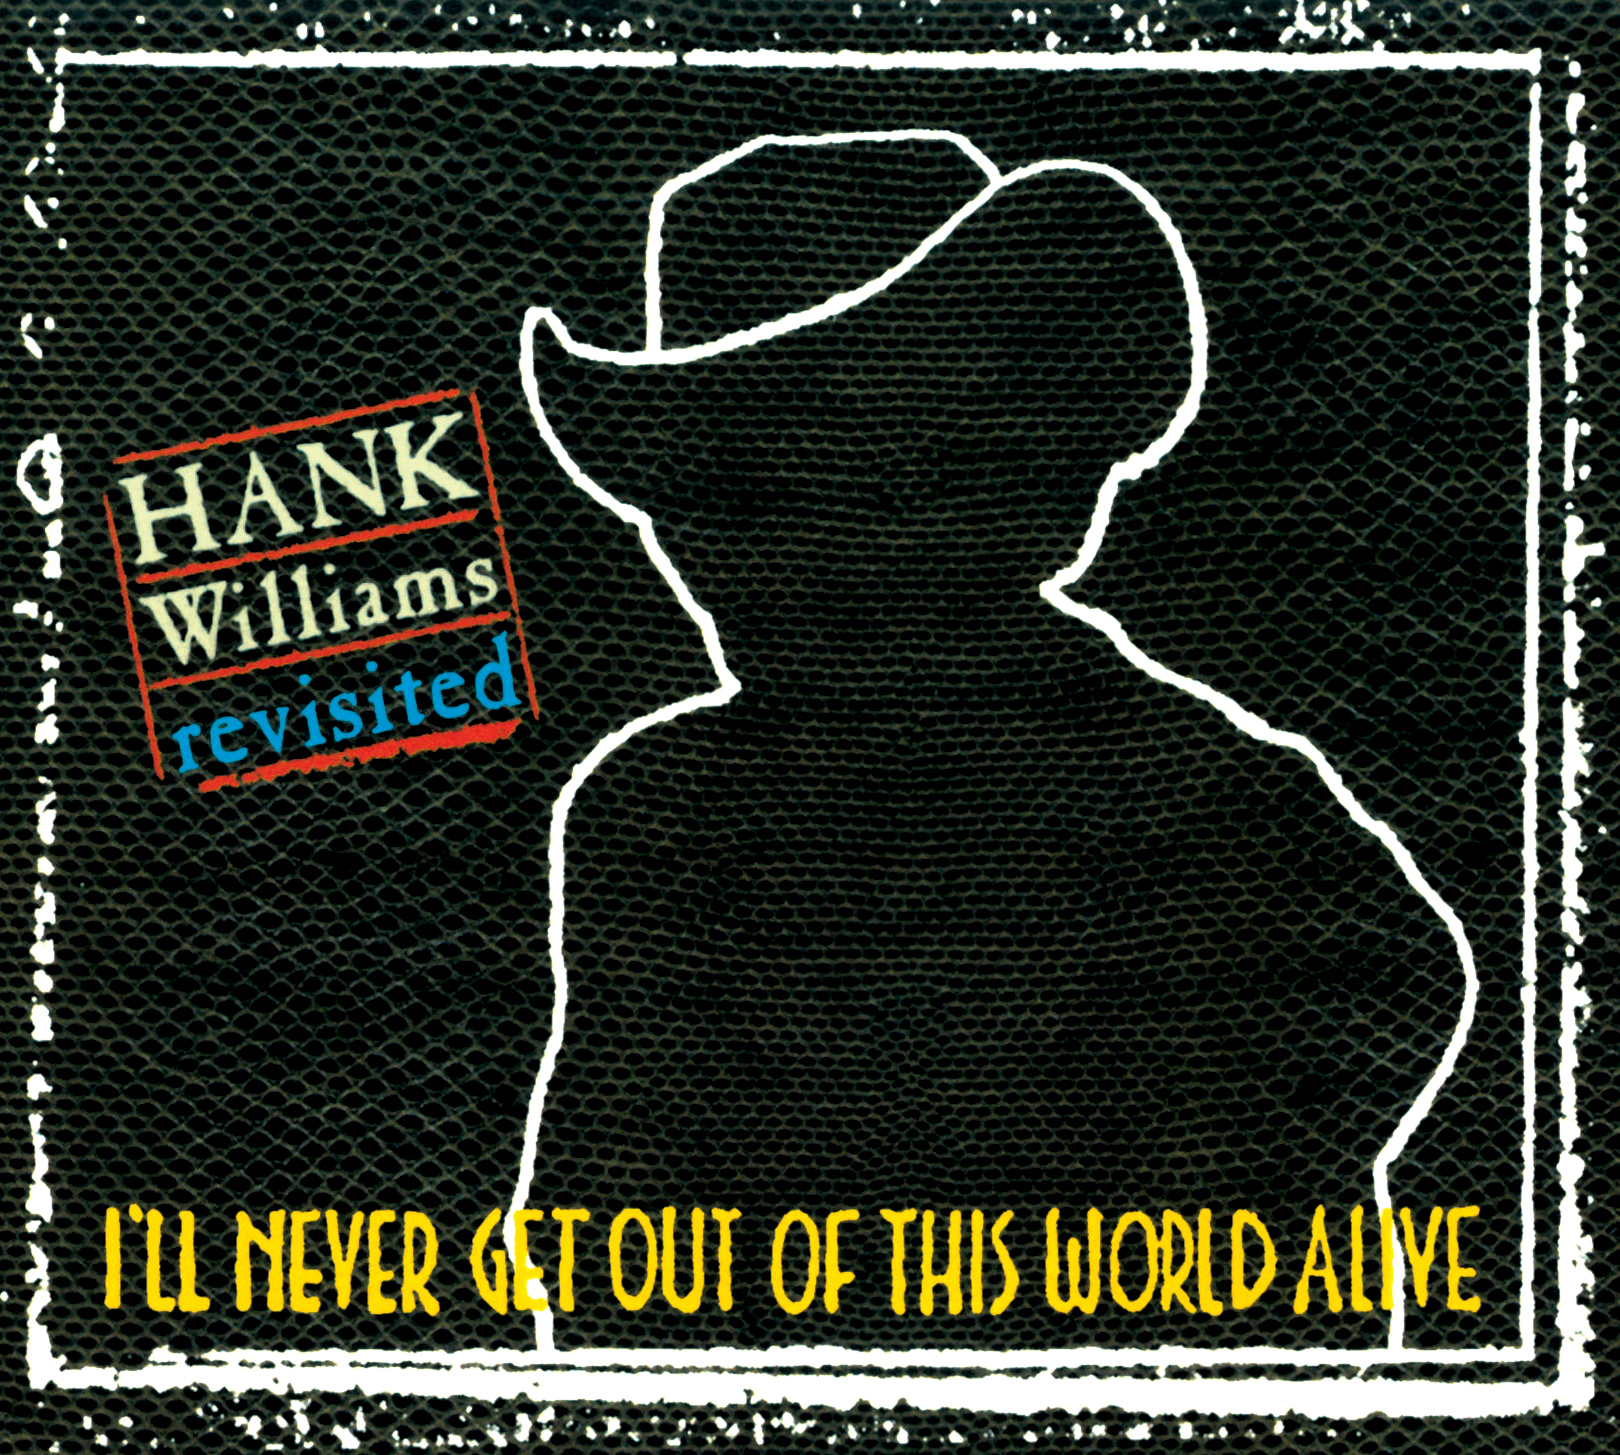 Hank Williams - Revisited - I´ll never get out of this world alive